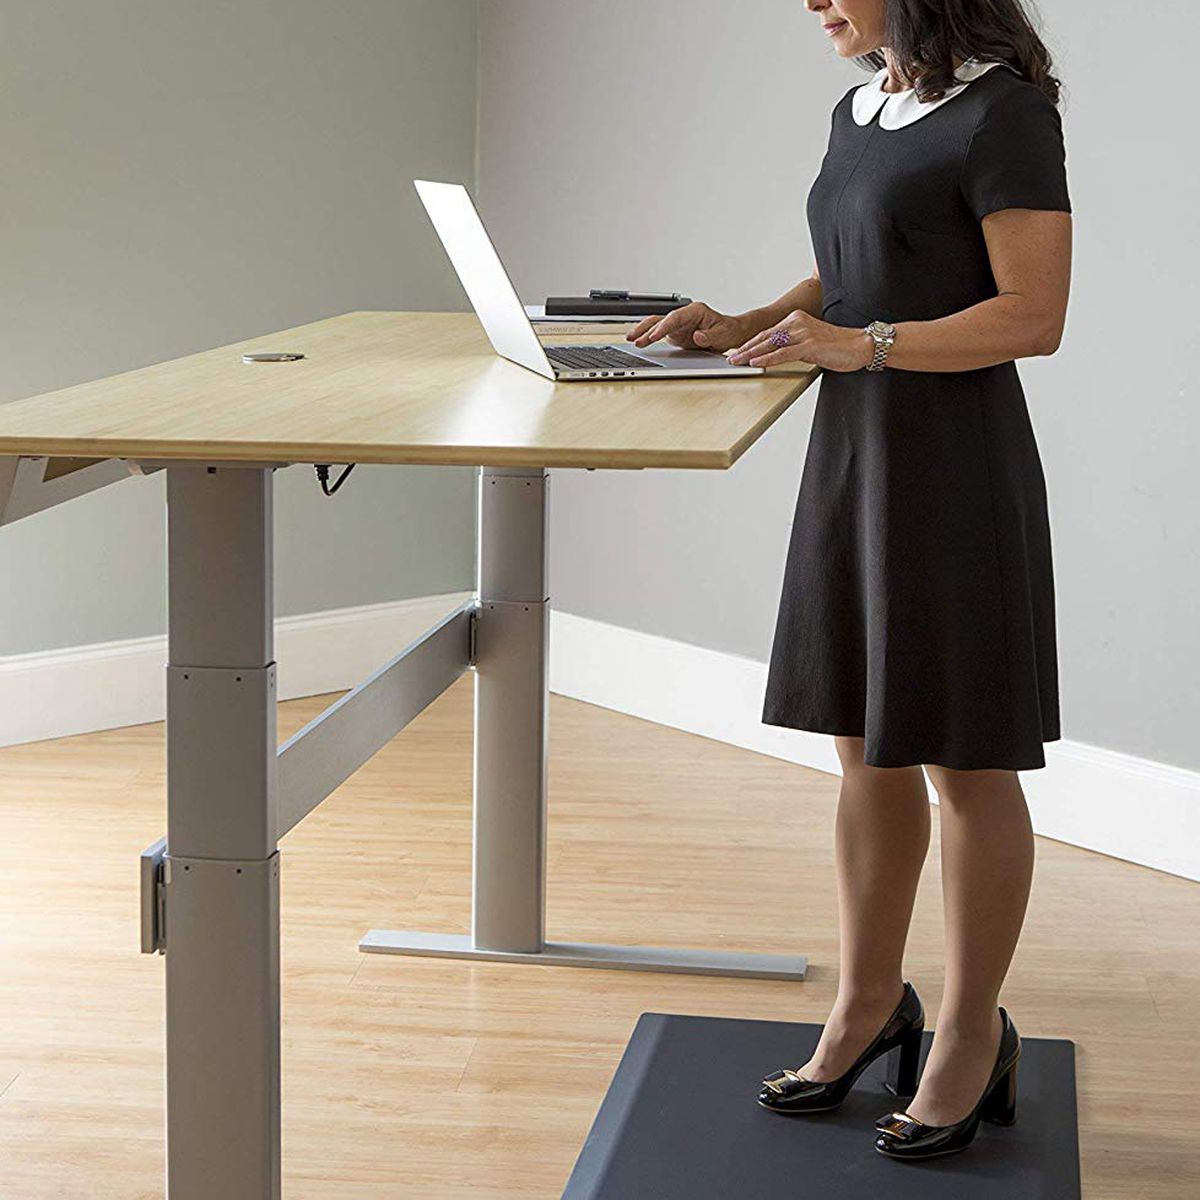 A woman wearing a black desk stands on a gray mat while working at a birch standing desk. 